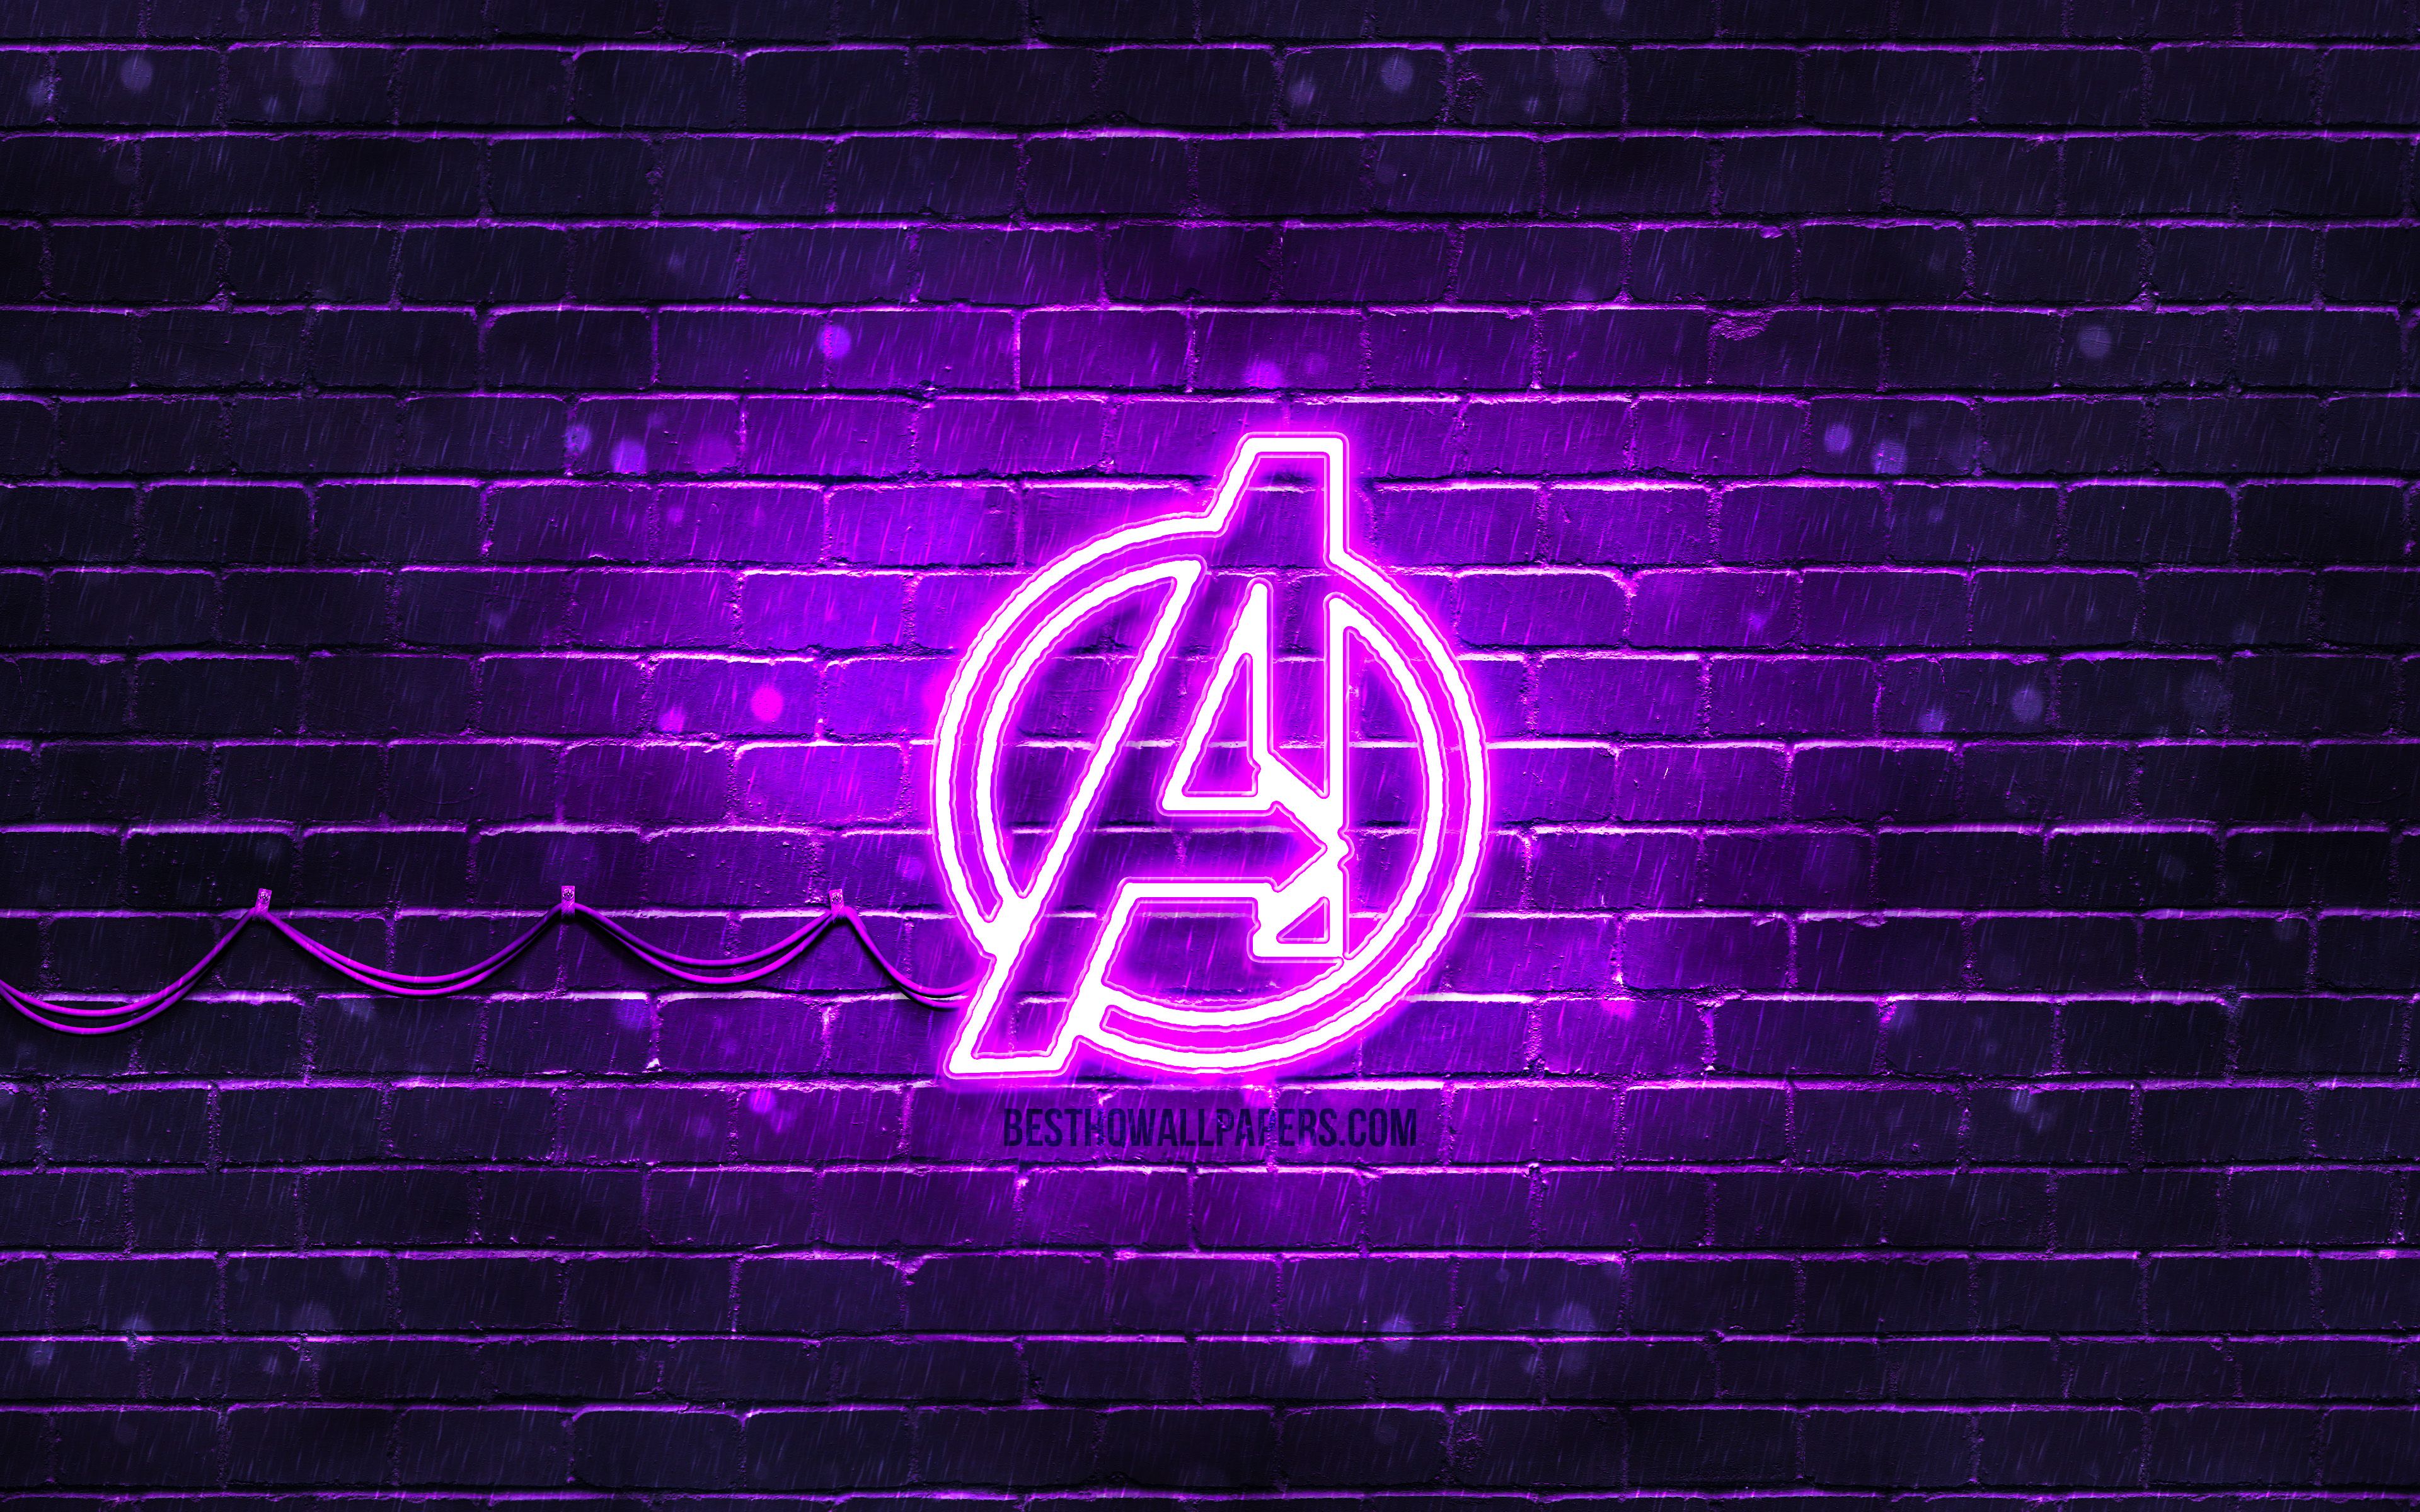 Download wallpaper Avengers violet logo, 4k, violet brickwall, Avengers logo, superheroes, Avengers neon logo, Avengers for desktop with resolution 3840x2400. High Quality HD picture wallpaper